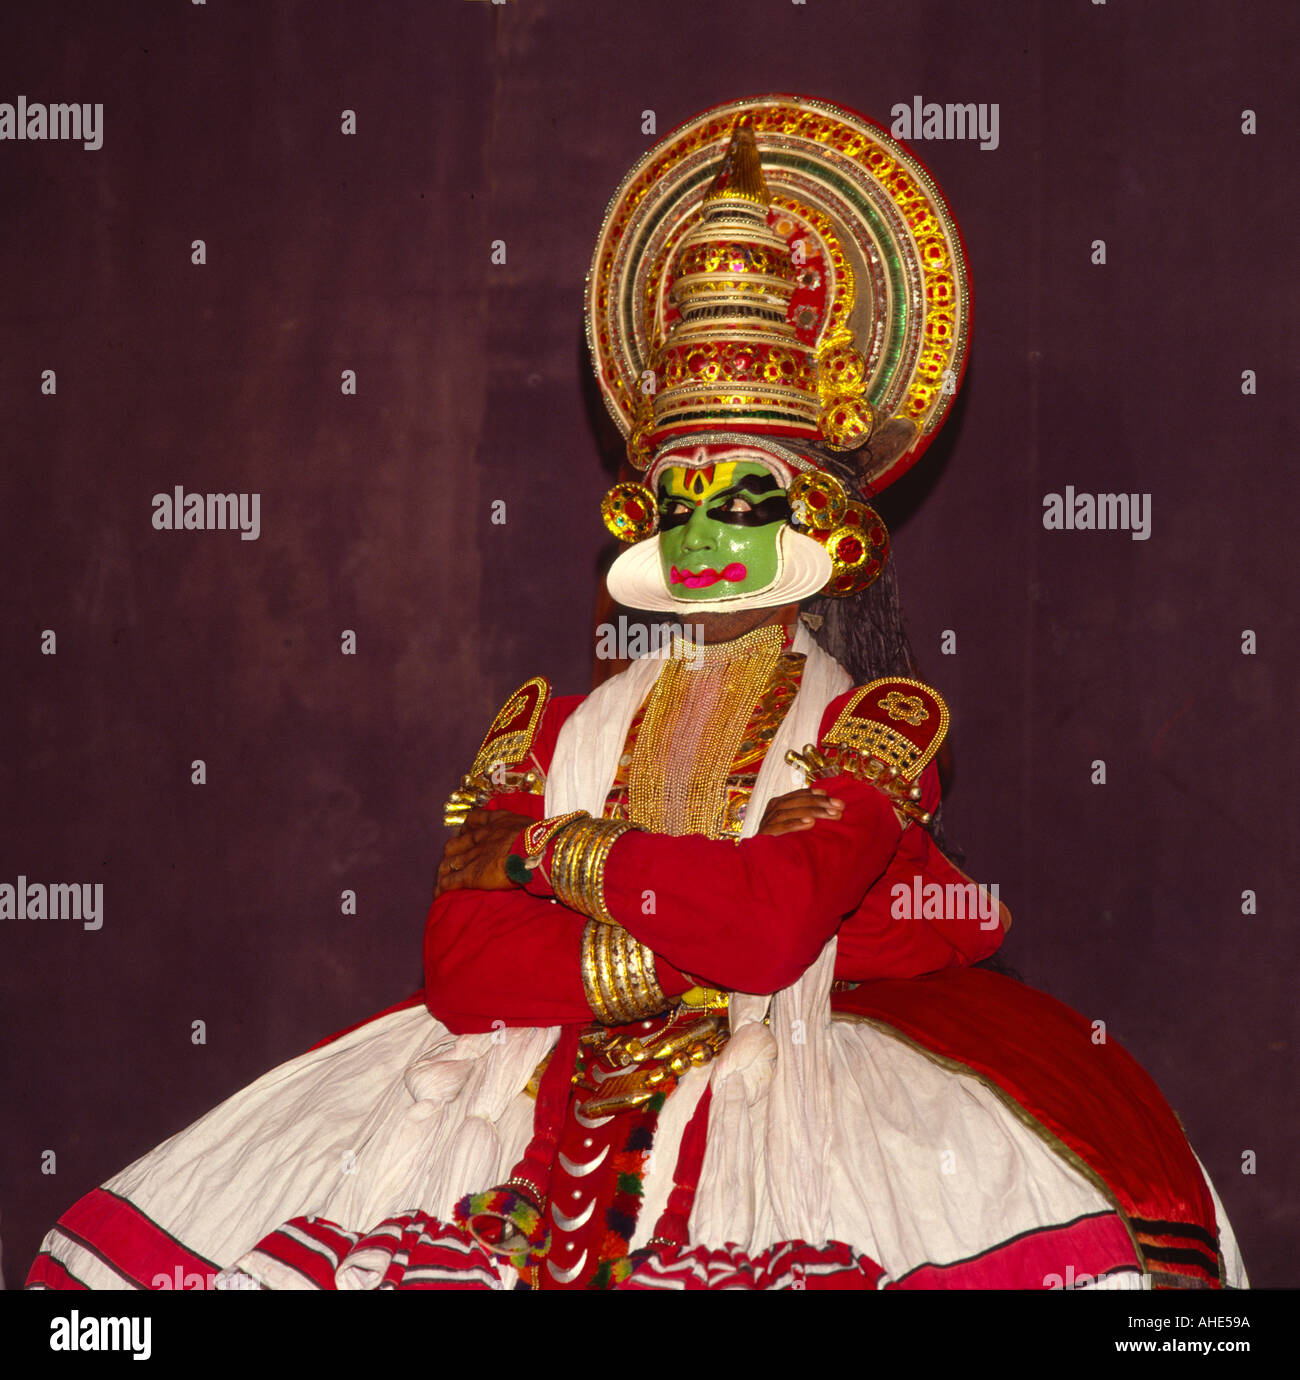 Traditional Kathakali dancer with complex green yellow and black facial and eye make-up performing in Cochin Kerala South India Stock Photo